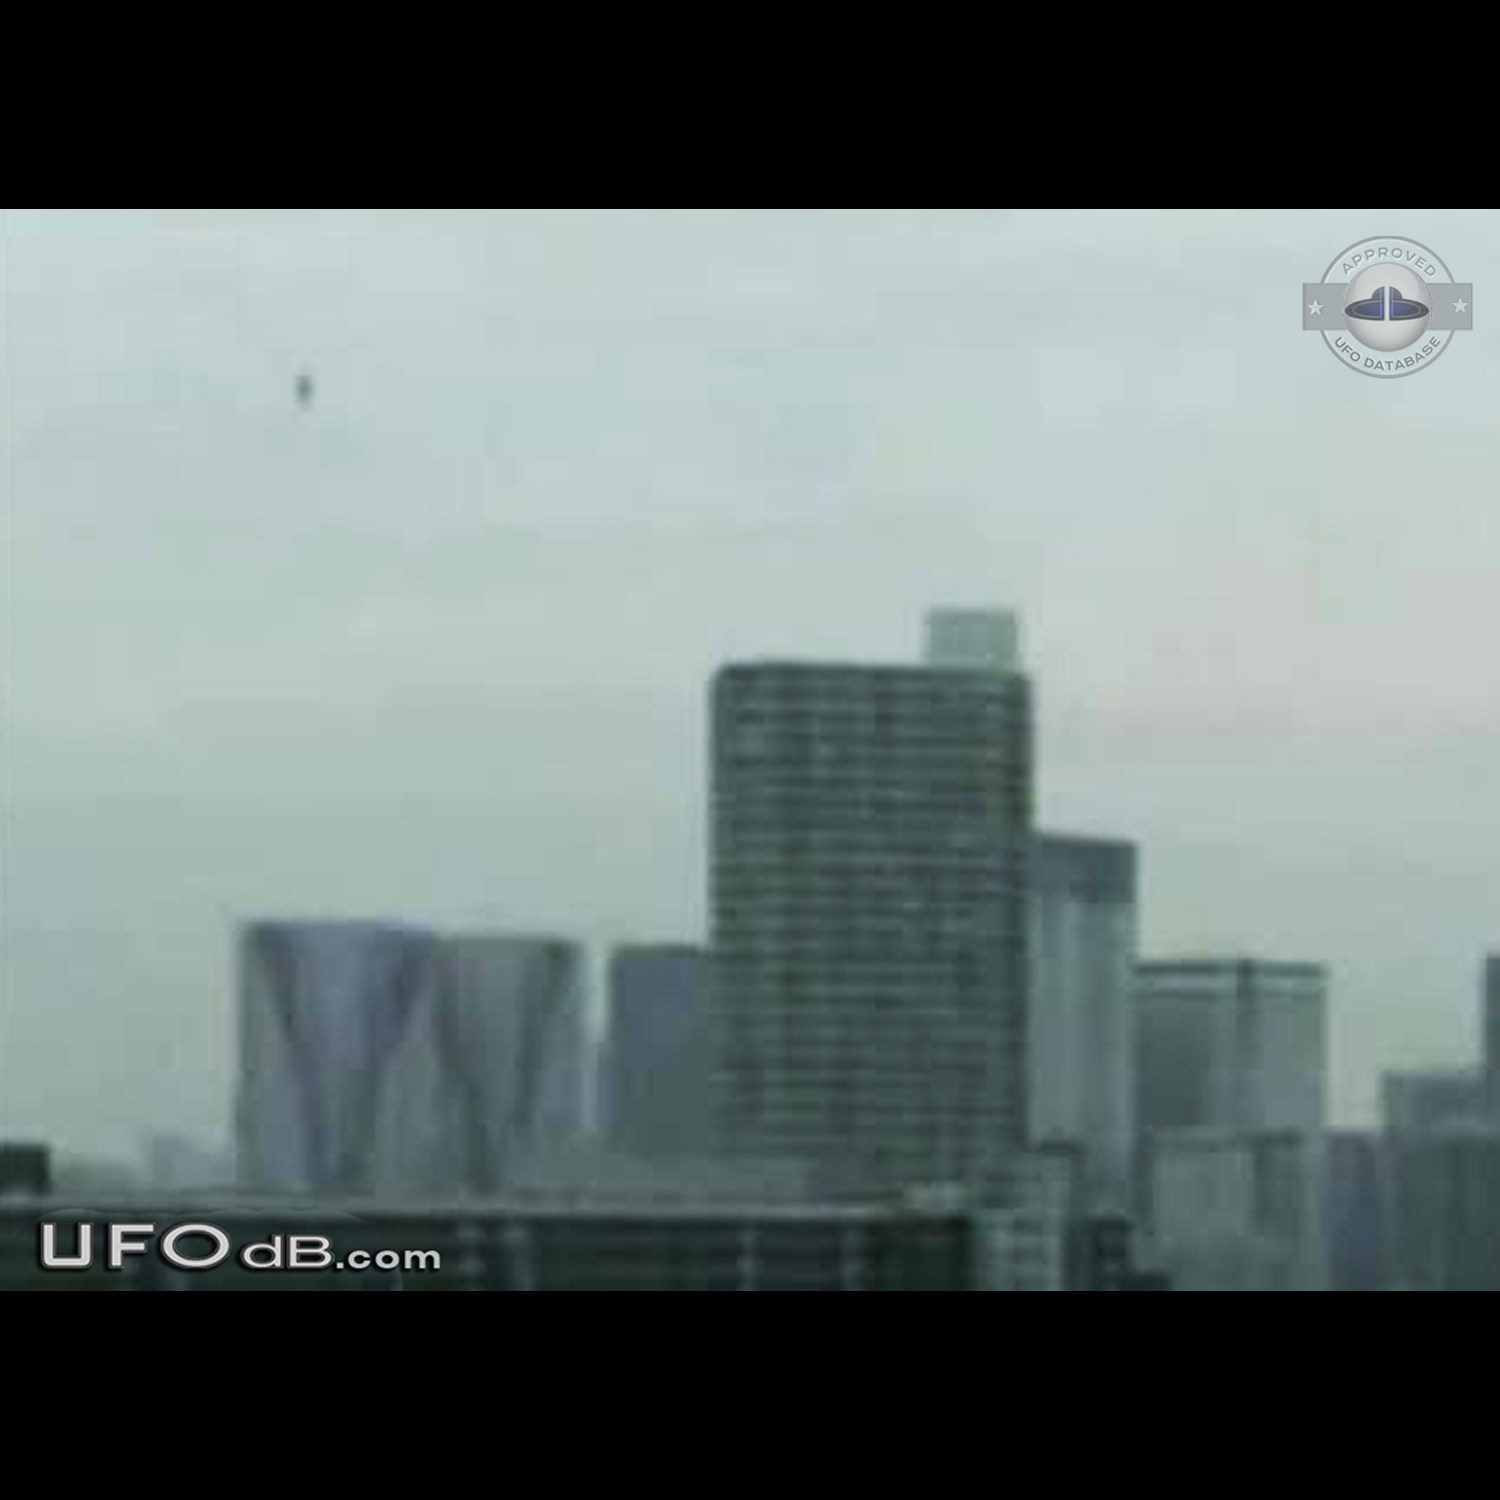 Probe ufo sighting caught on picture in Tokyo, Japan - January 2012 UFO Picture #410-2